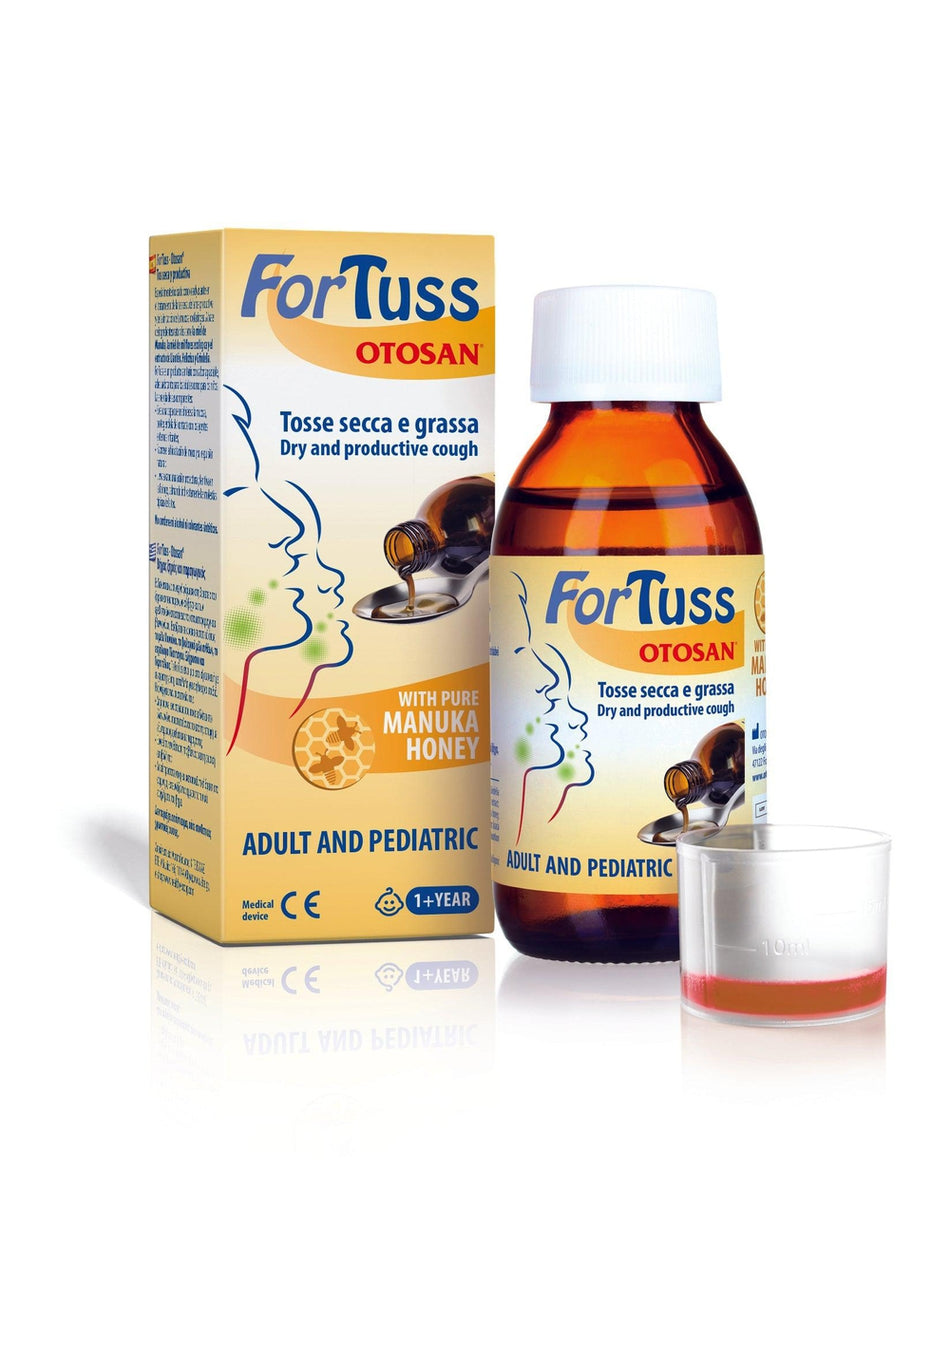 Otosan ForTuss Cough Syrup 180g- Lillys Pharmacy and Health Store